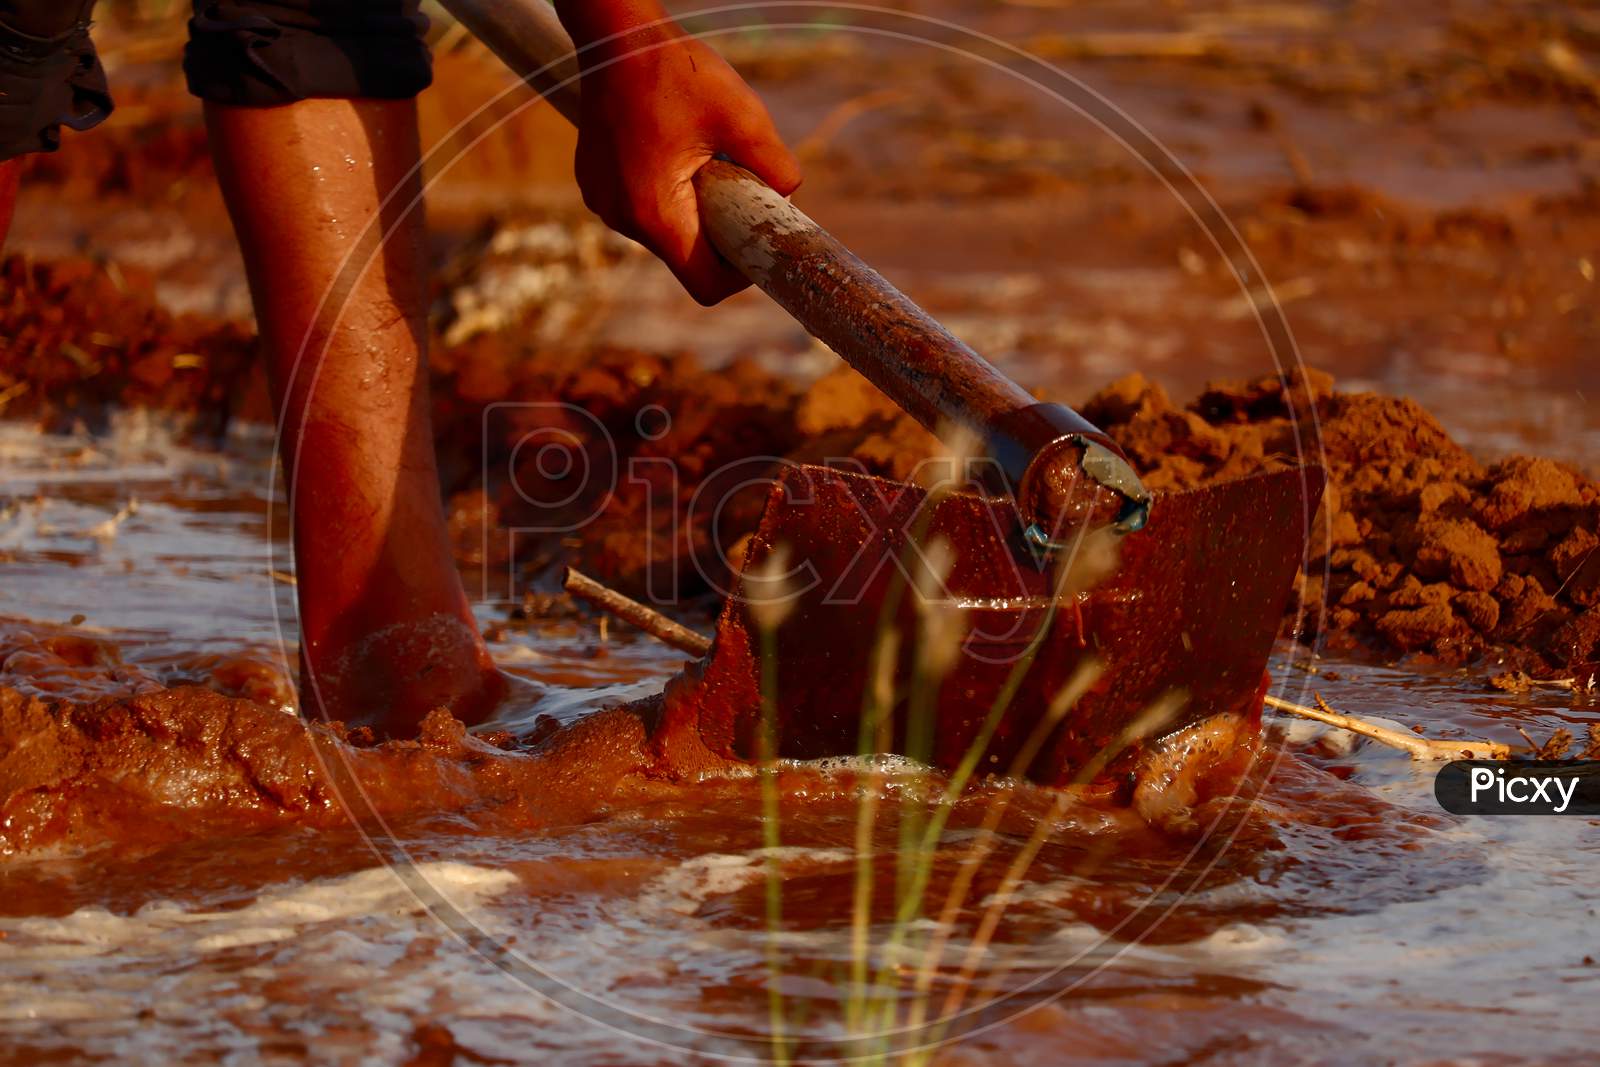 Man Working In Garden Between Beds With Hoe In Hands,Young Indian Farmer Water The Field,Selective Focus,Indian Farmer Working In Farm With Hoe,